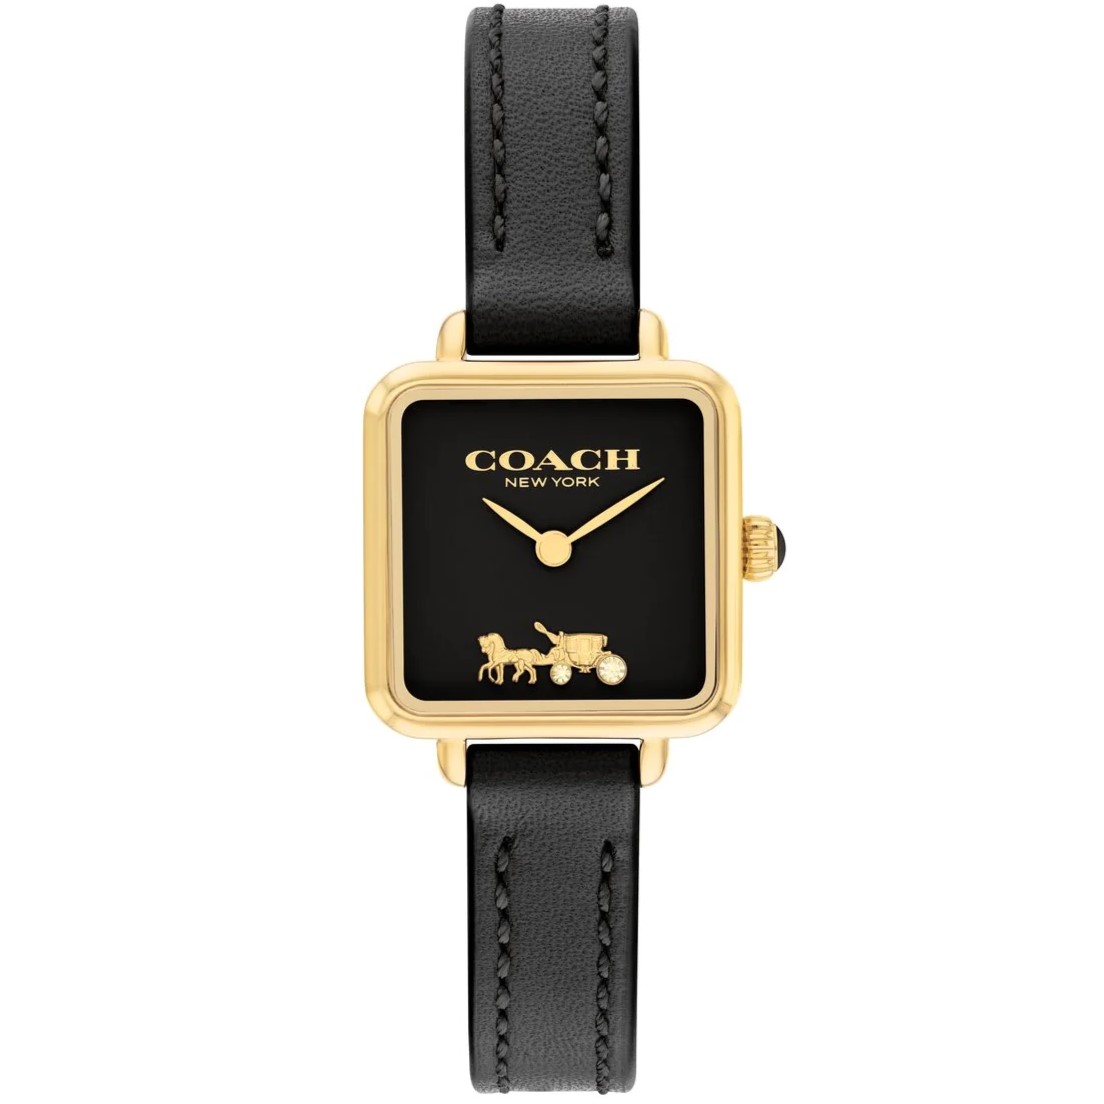 ĐỒNG HỒ NỮ DÂY DA ĐEN COACH CASS SIGNATURE HORSE AND CARRIAGE ION-PLATED GOLDTONE STEEL AND BLACK LEATHER STRAP WATCH 14504225 2